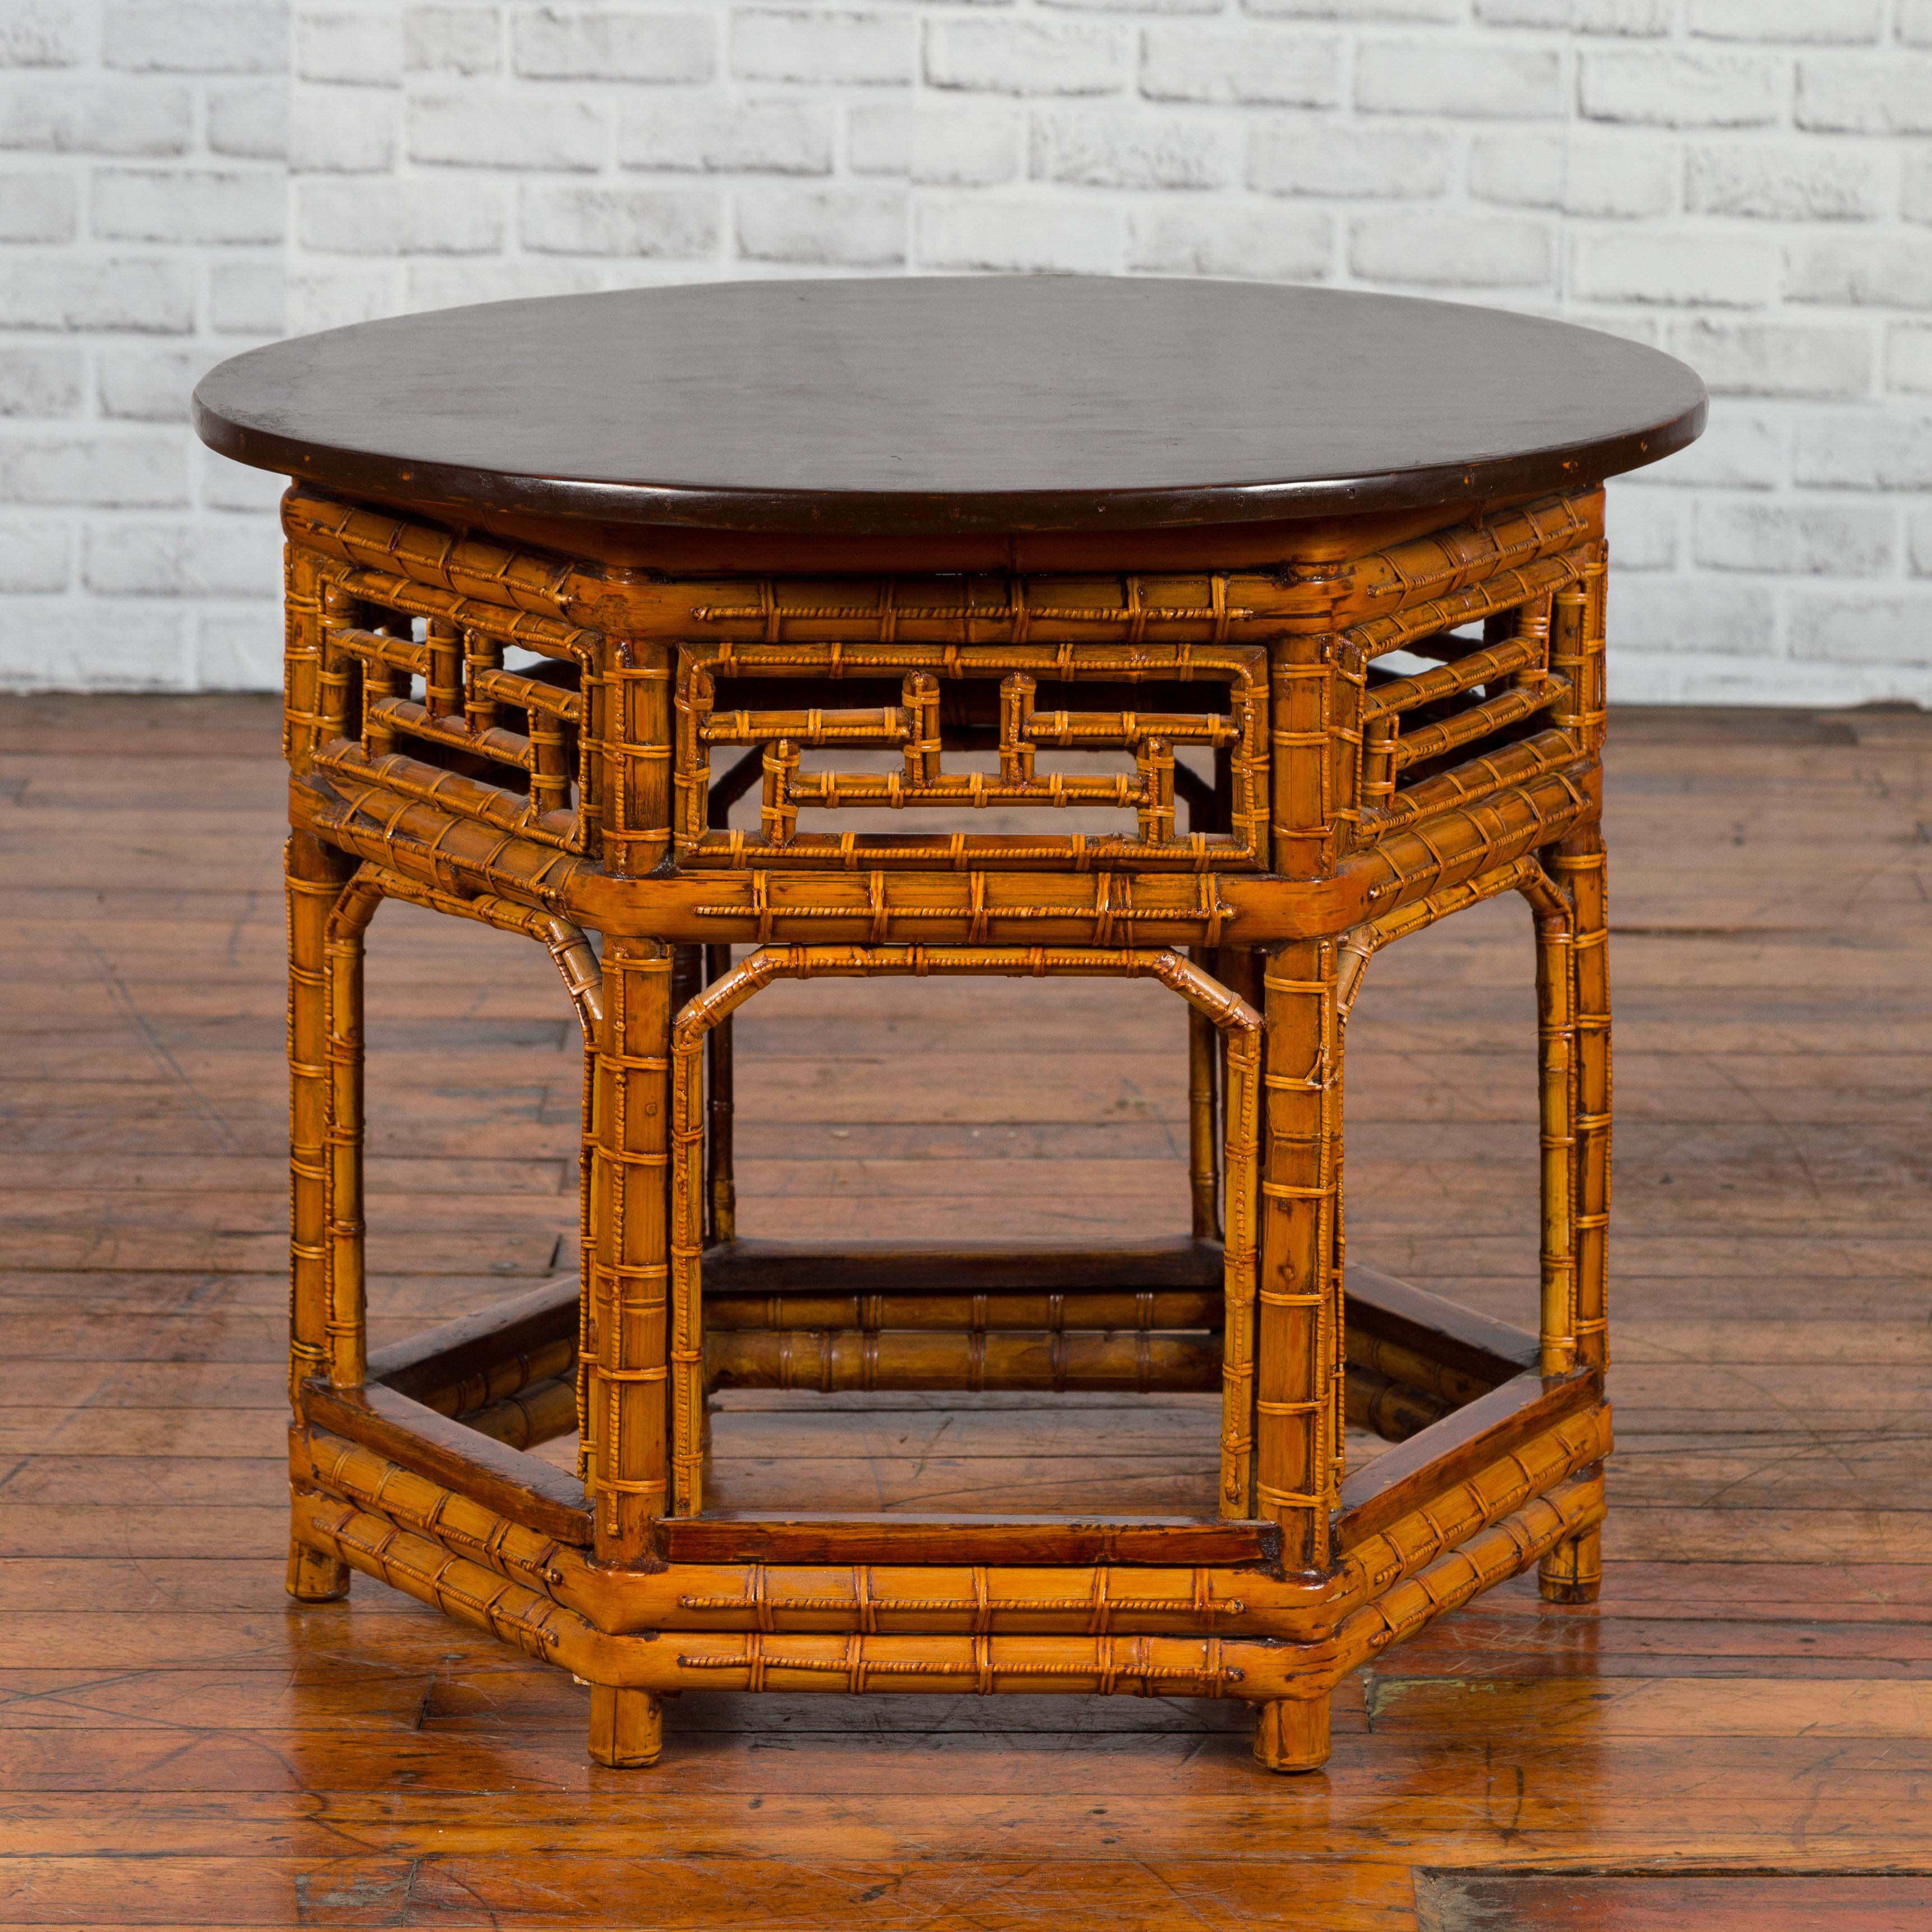 A Chinese Qing Dynasty period hexagonal bamboo and dark brown lacquered side table from the 19th century, with intricate motifs. Created in China during the Qing Dynasty period, this side table features a circular dark brown lacquered top sitting